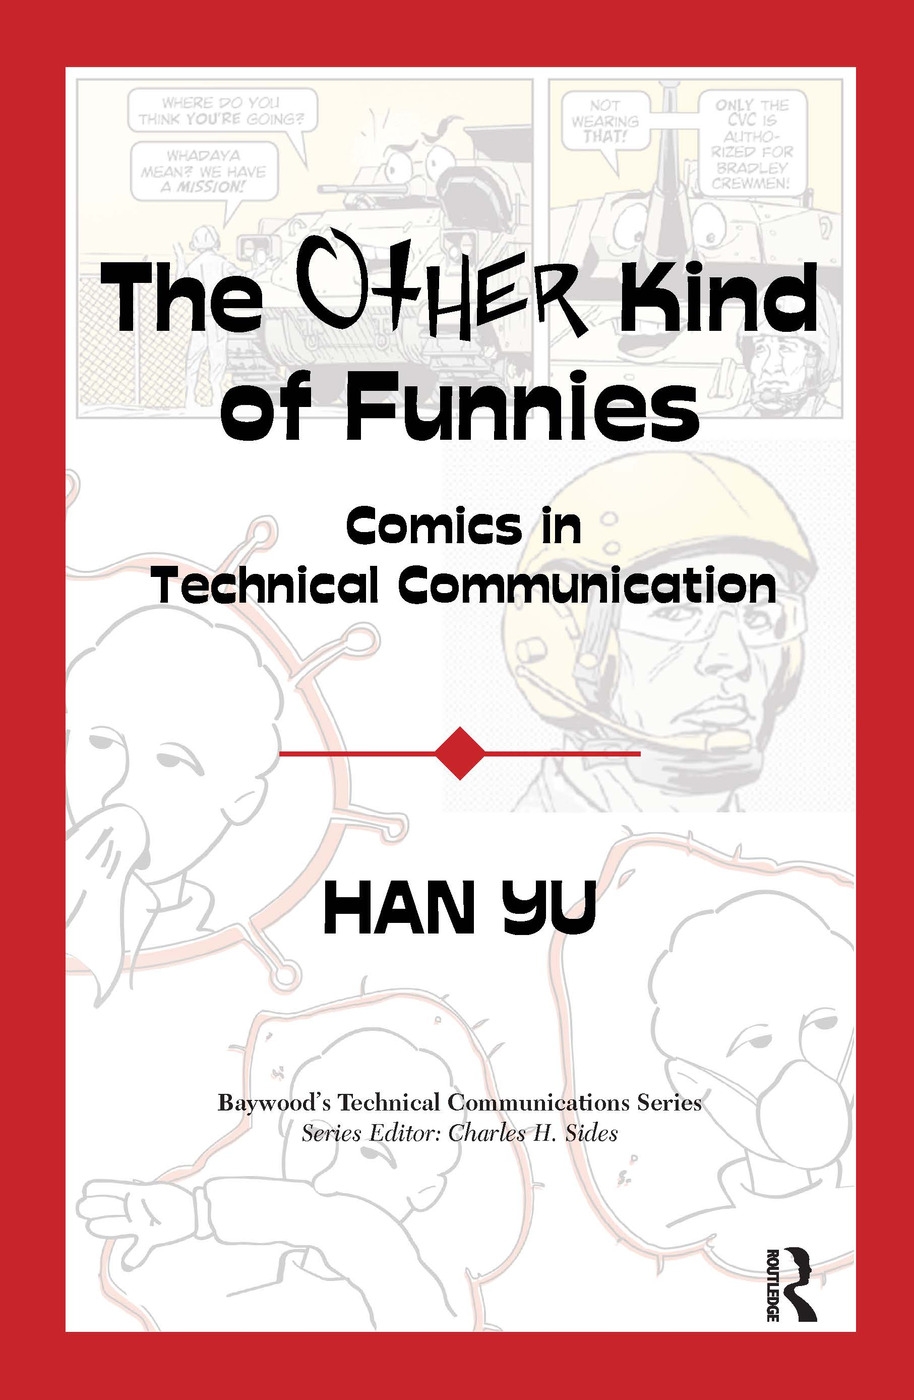 The Other Kind of Funnies: Comics in Technical Communication